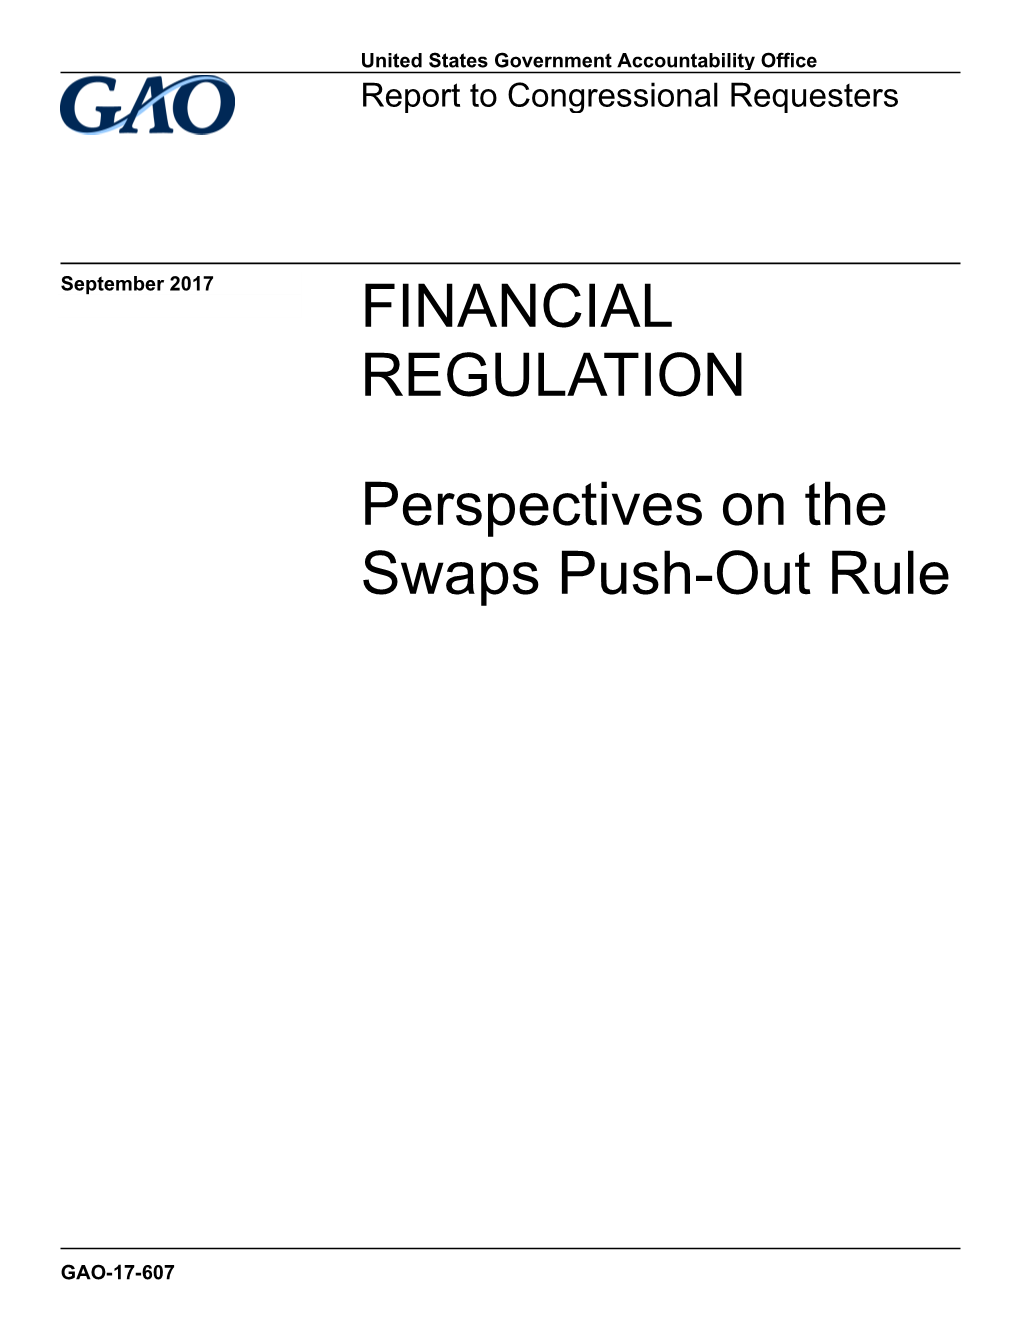 Perspectives on the Swaps Push-Out Rule